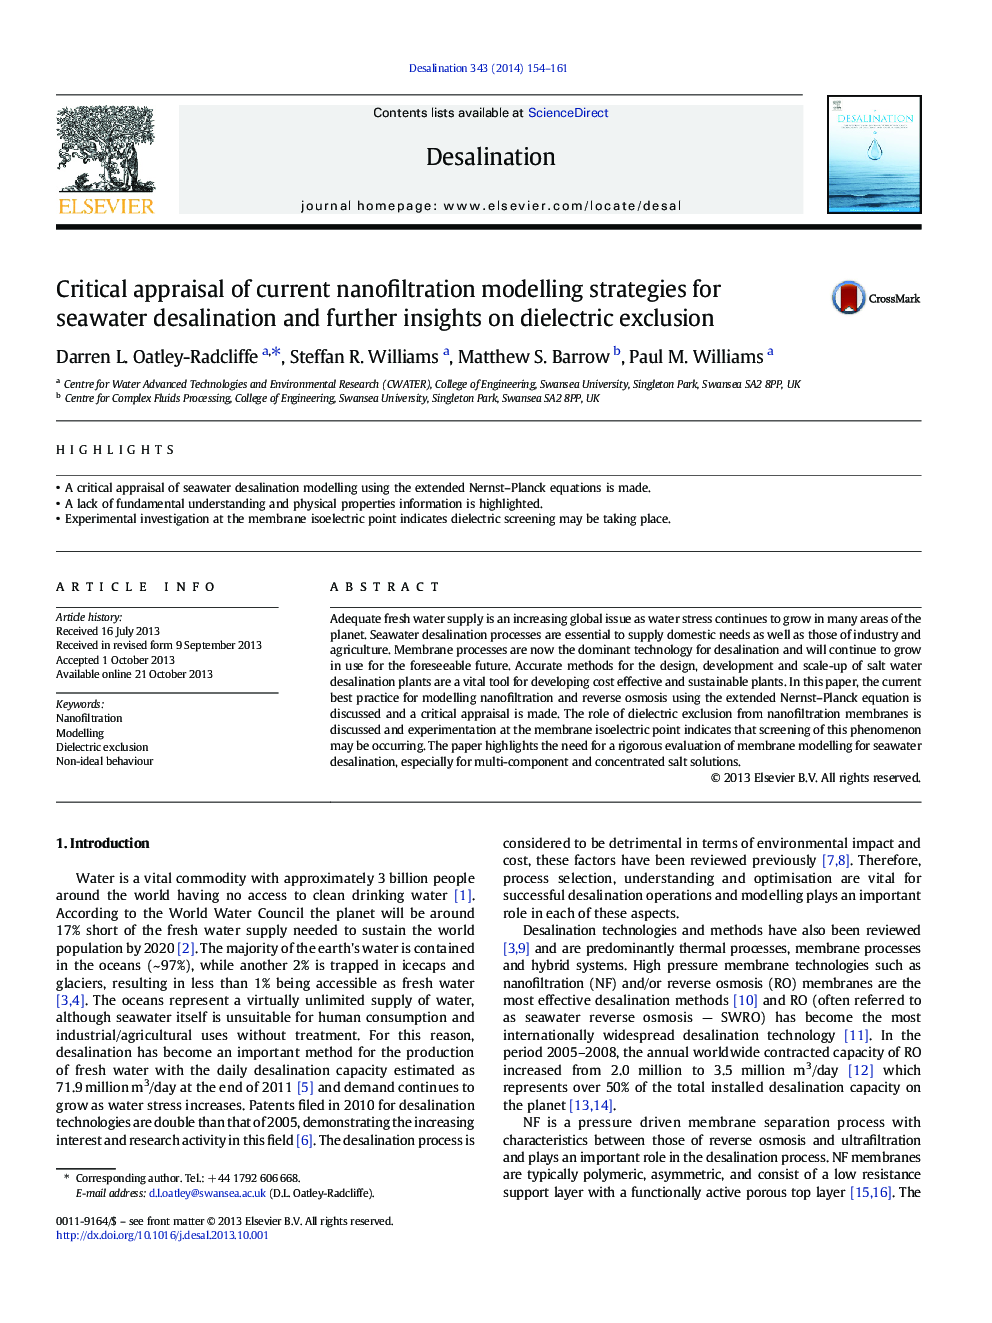 Critical appraisal of current nanofiltration modelling strategies for seawater desalination and further insights on dielectric exclusion